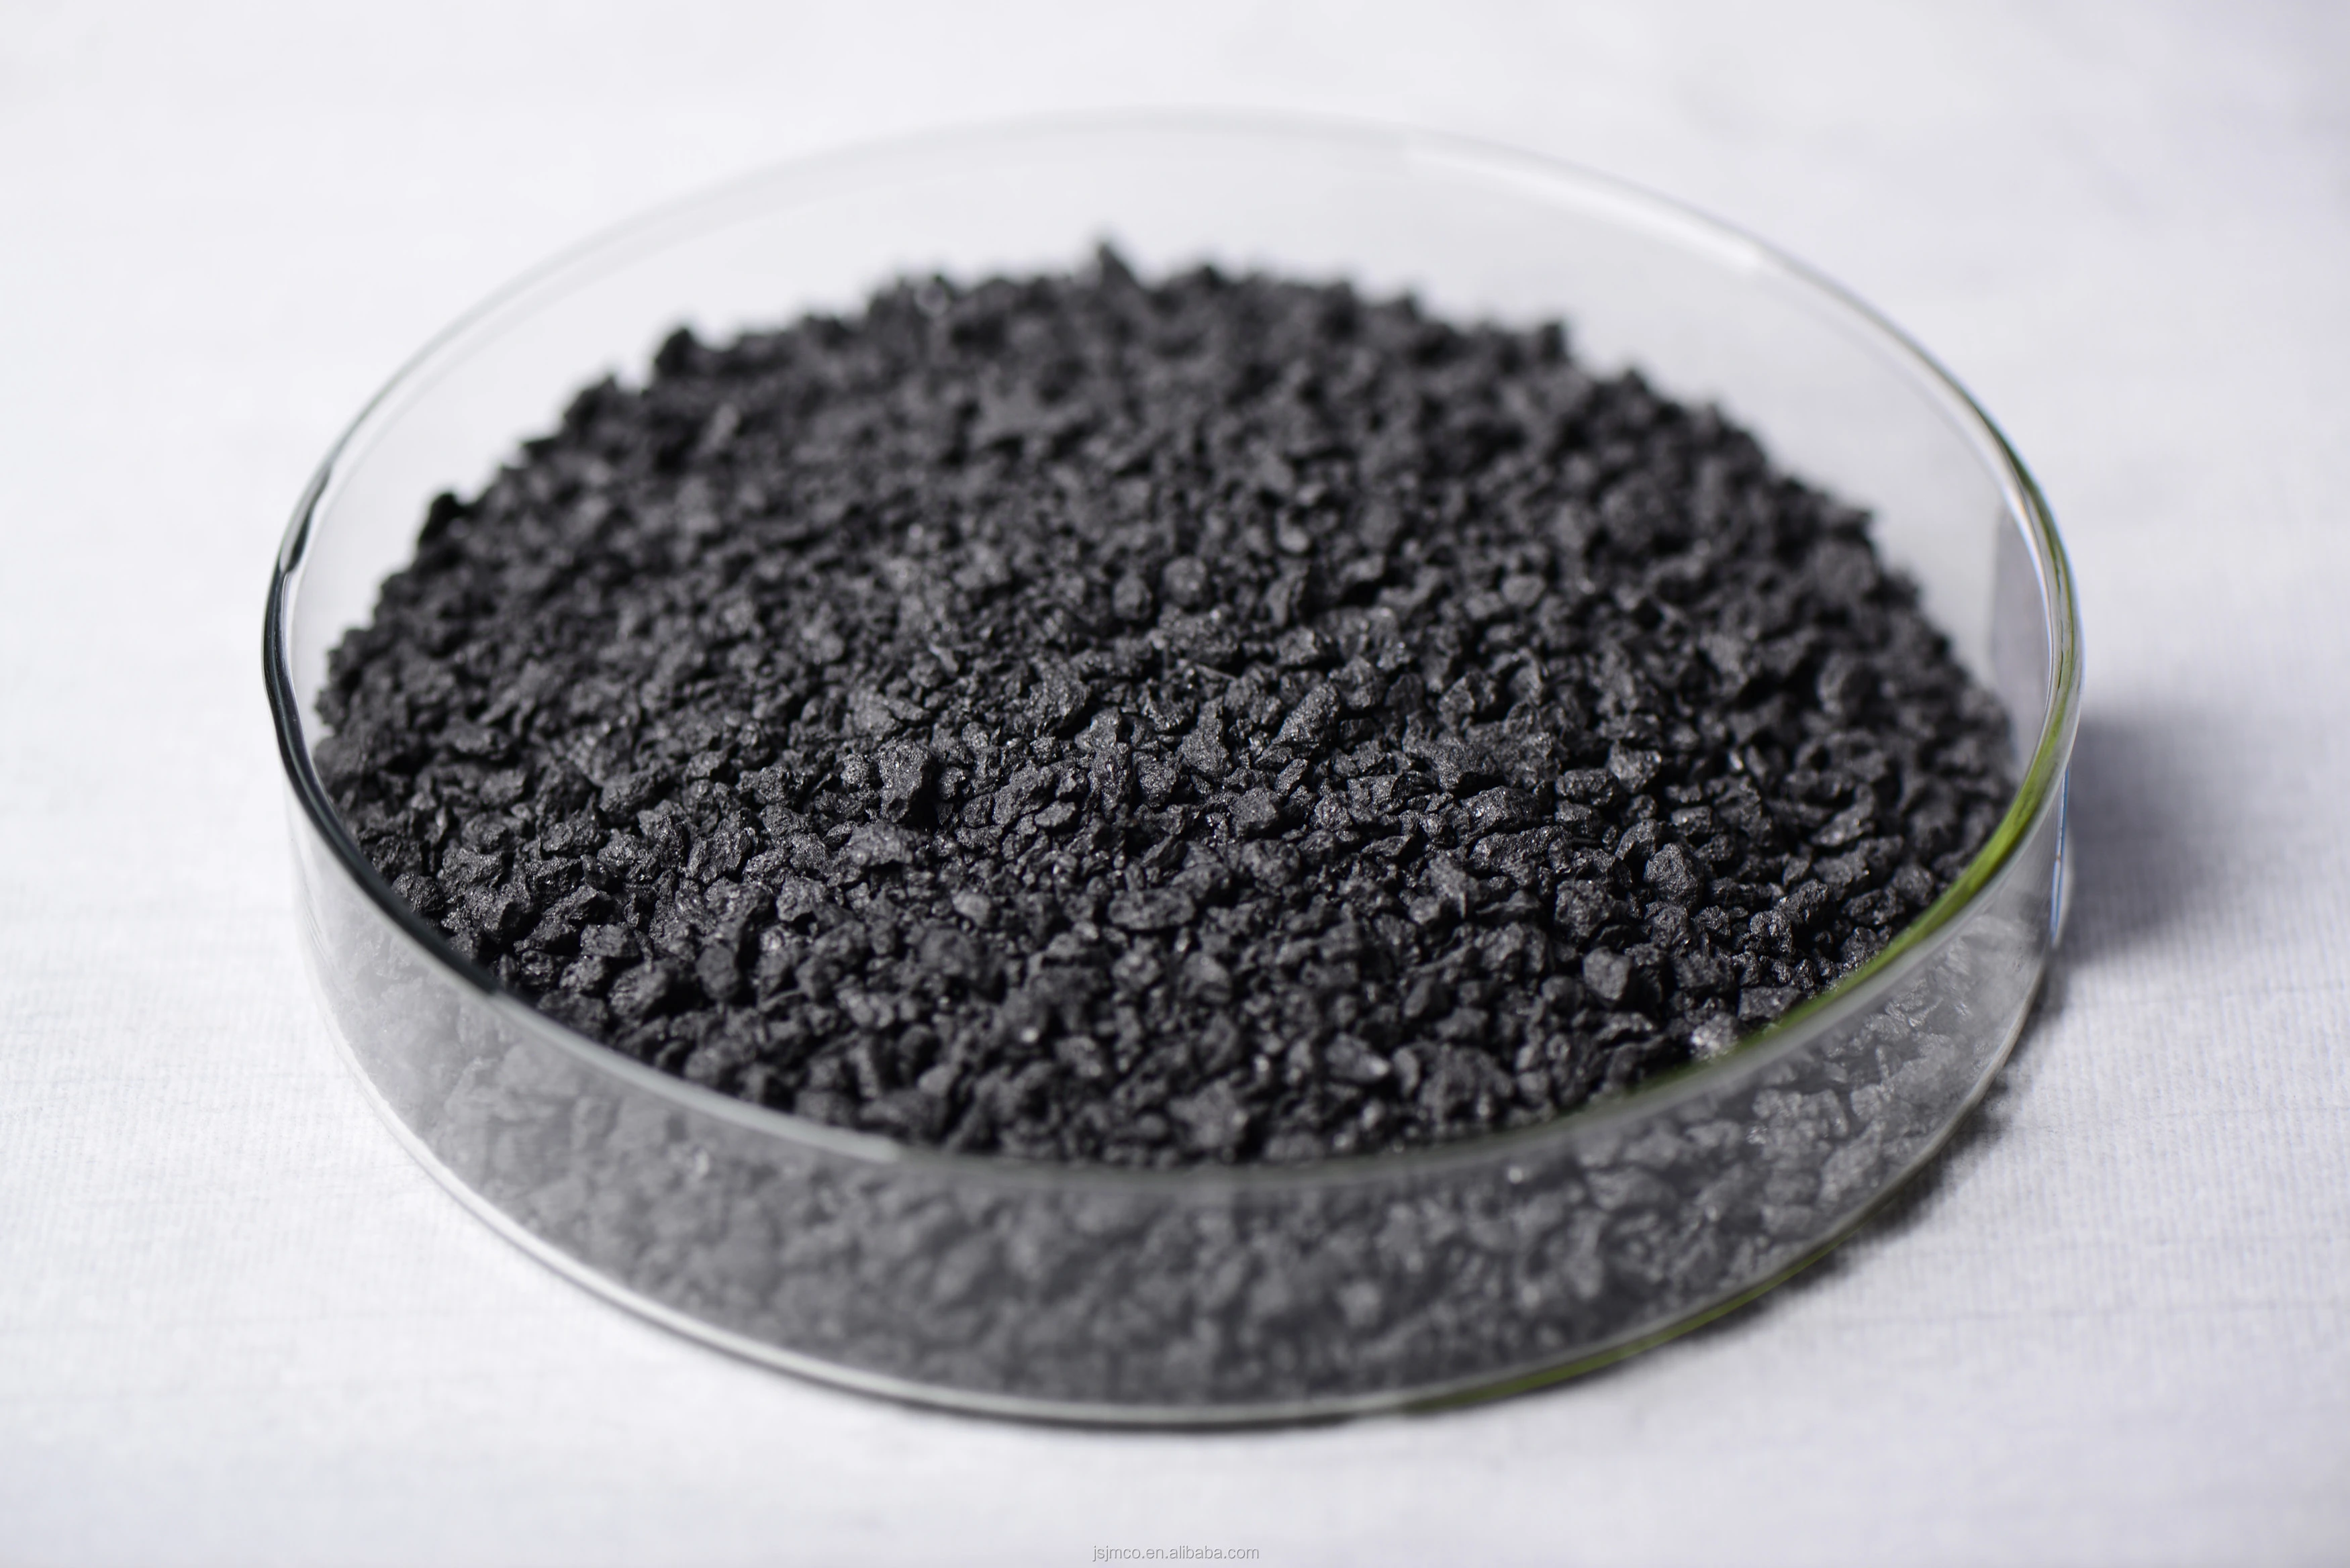 graphite electrode scraps from broken electrode scraps used in steel making and casting